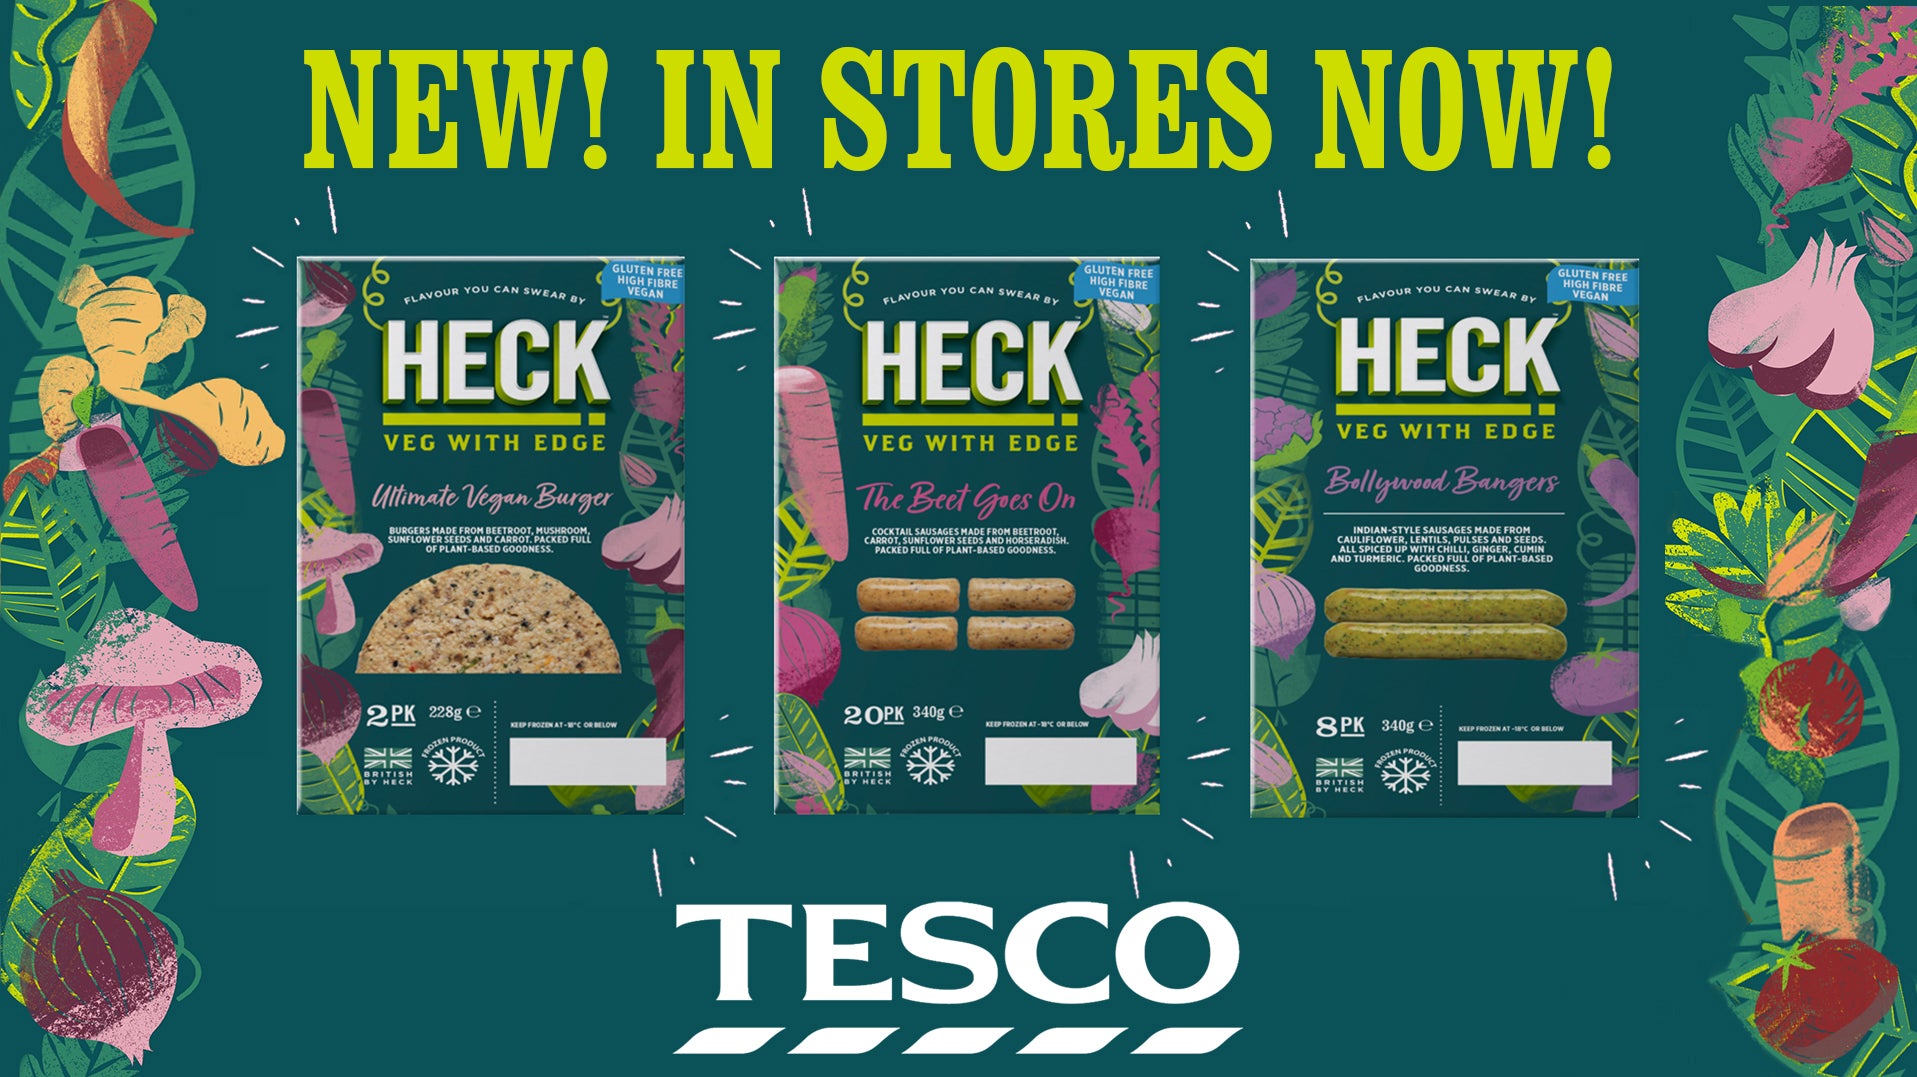 Exclusively In Tesco Stores! Three BRAND NEW Flavours Join The HECK Frozen Veg Range